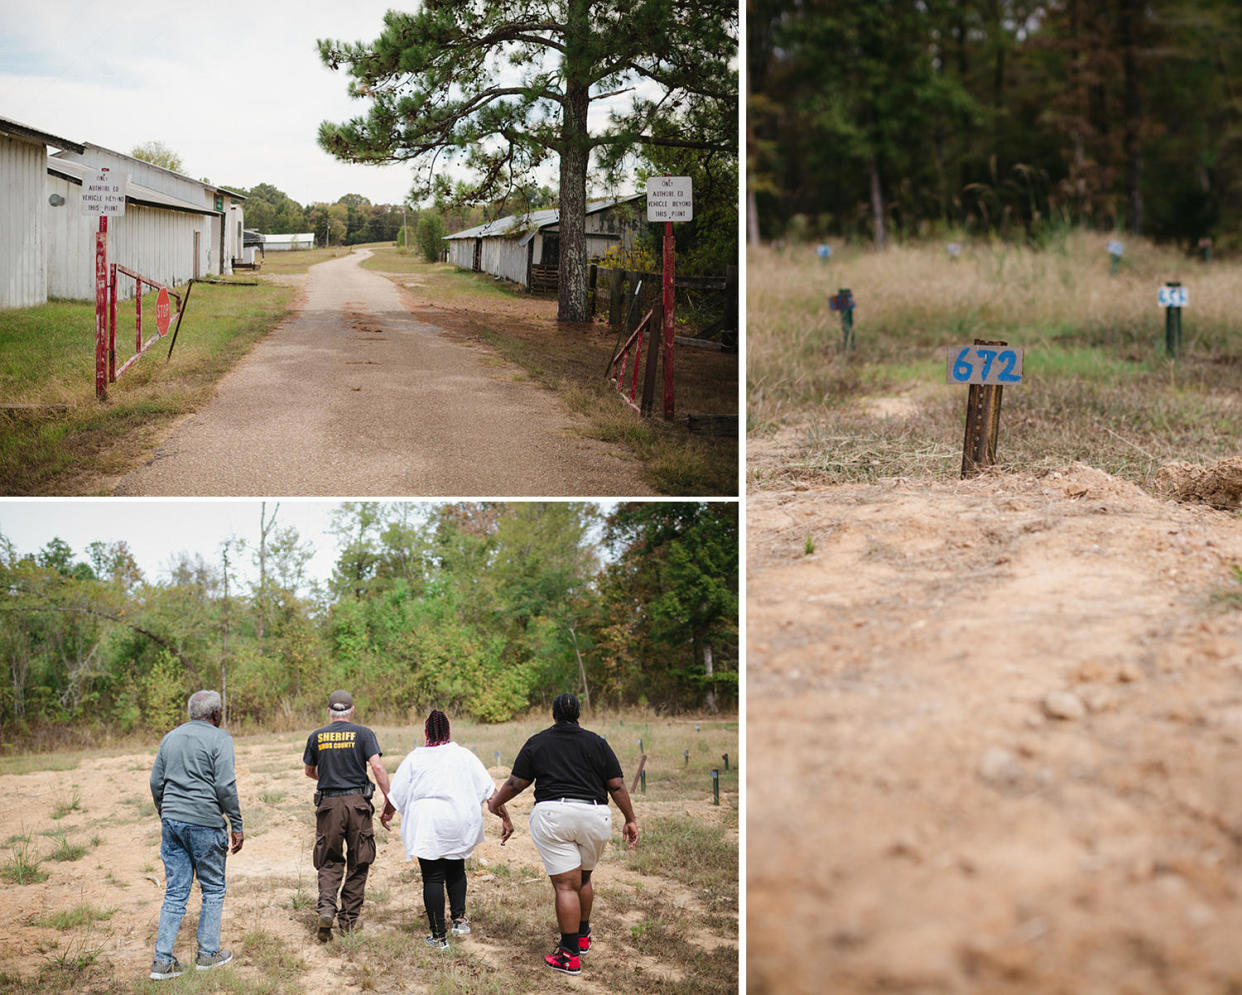 Image: Bettersten Wade arrives to a burial site with numbered markers at the Hinds County Jail penal farm. (Ashleigh Coleman for NBC News)